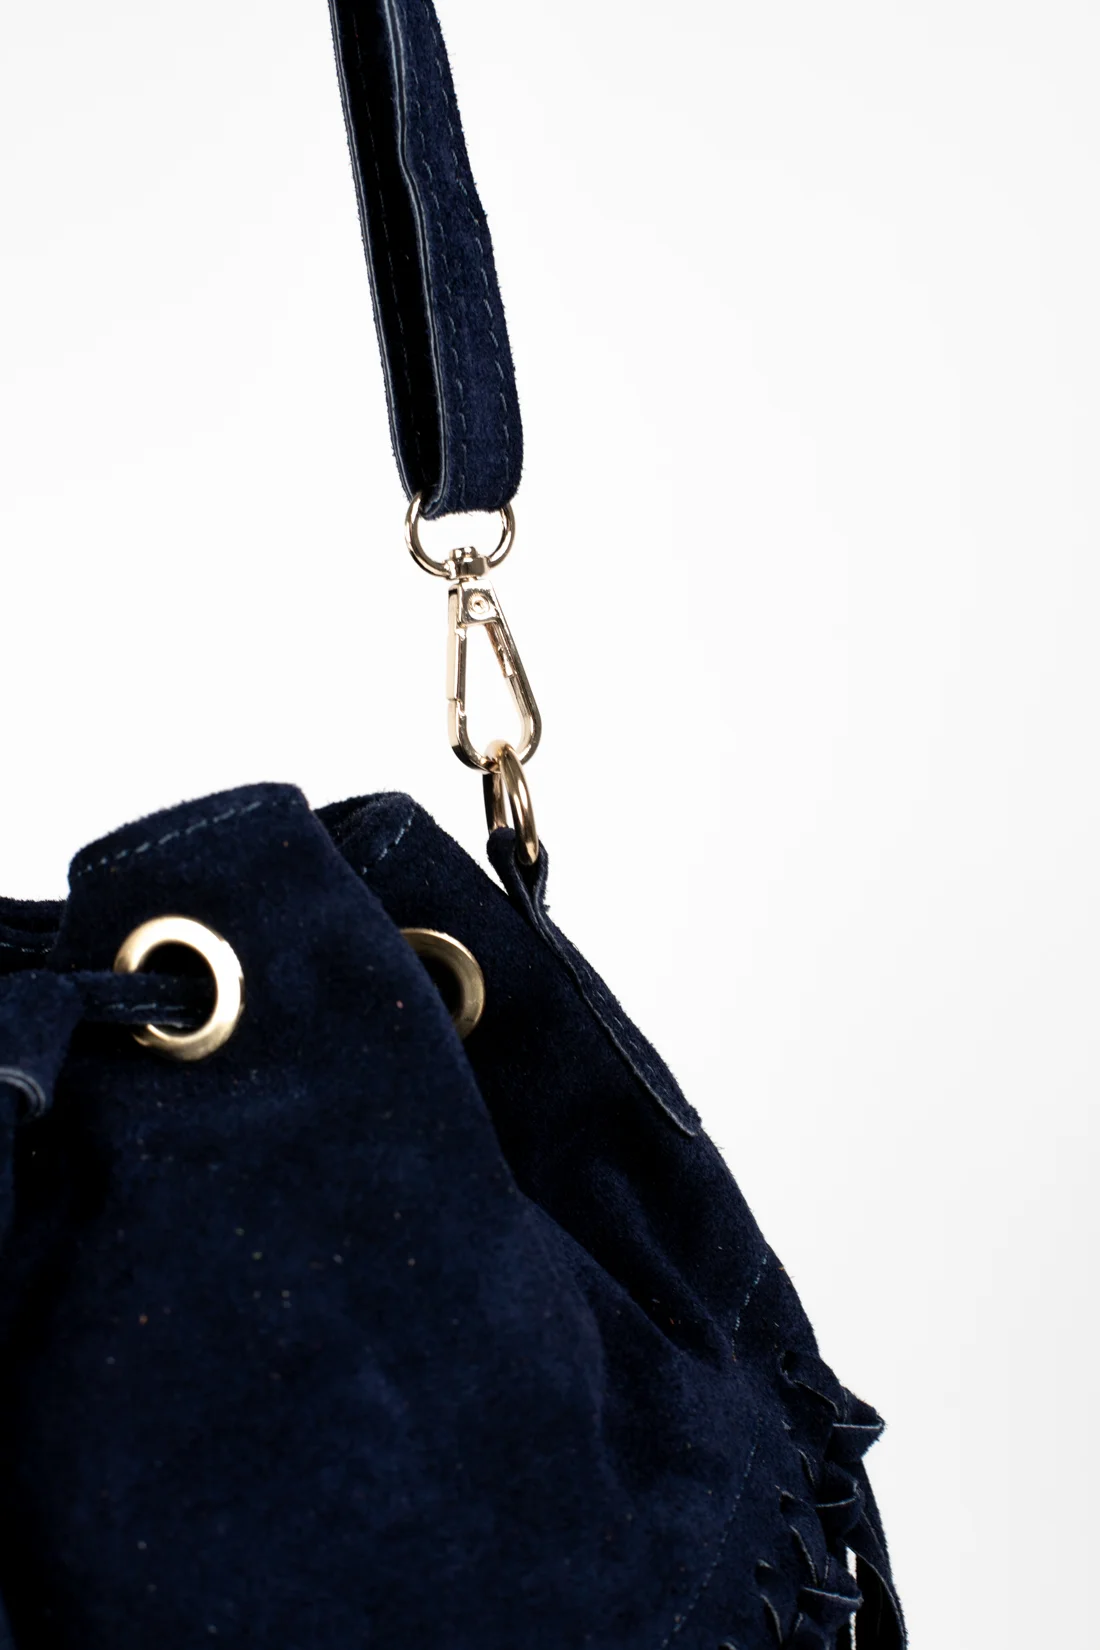 MAUMERE LEATHER BAG - NAVY BLUE